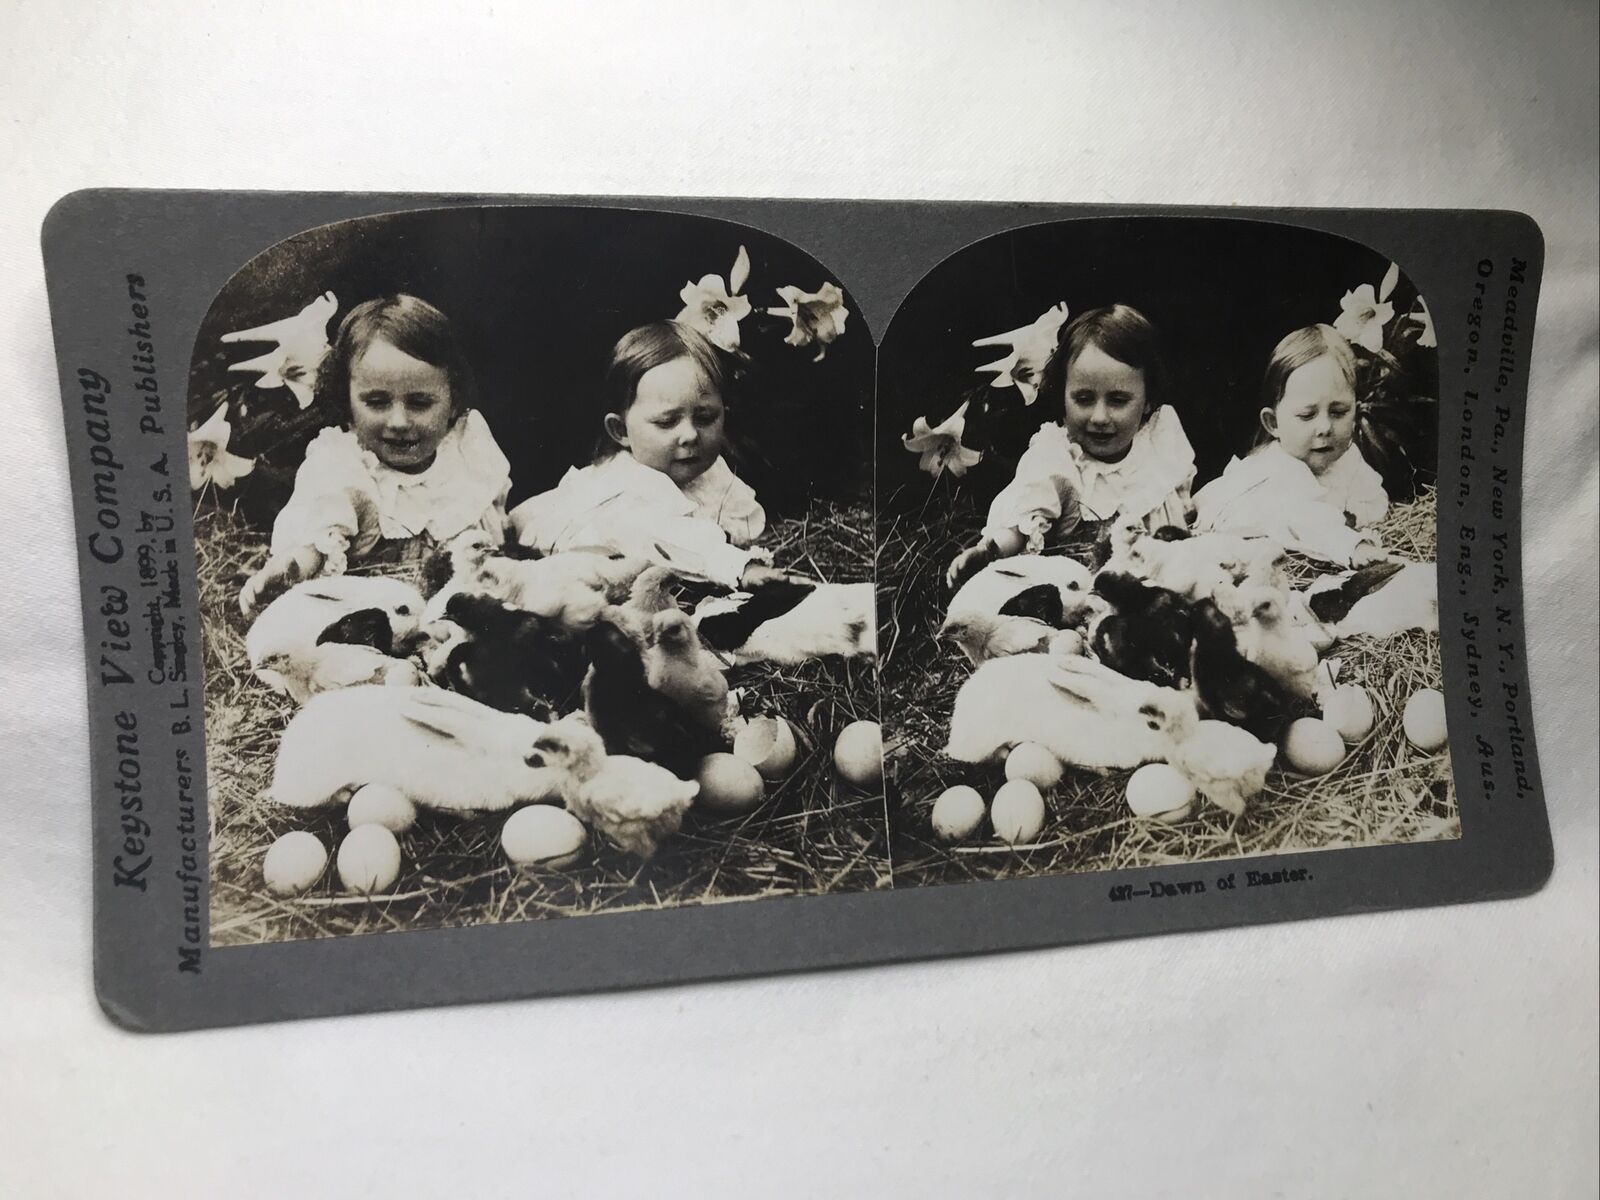 Antique Keystone View Stereoview Card “Dawn Of Easter” #427 ~ Bunny Chicks Kids